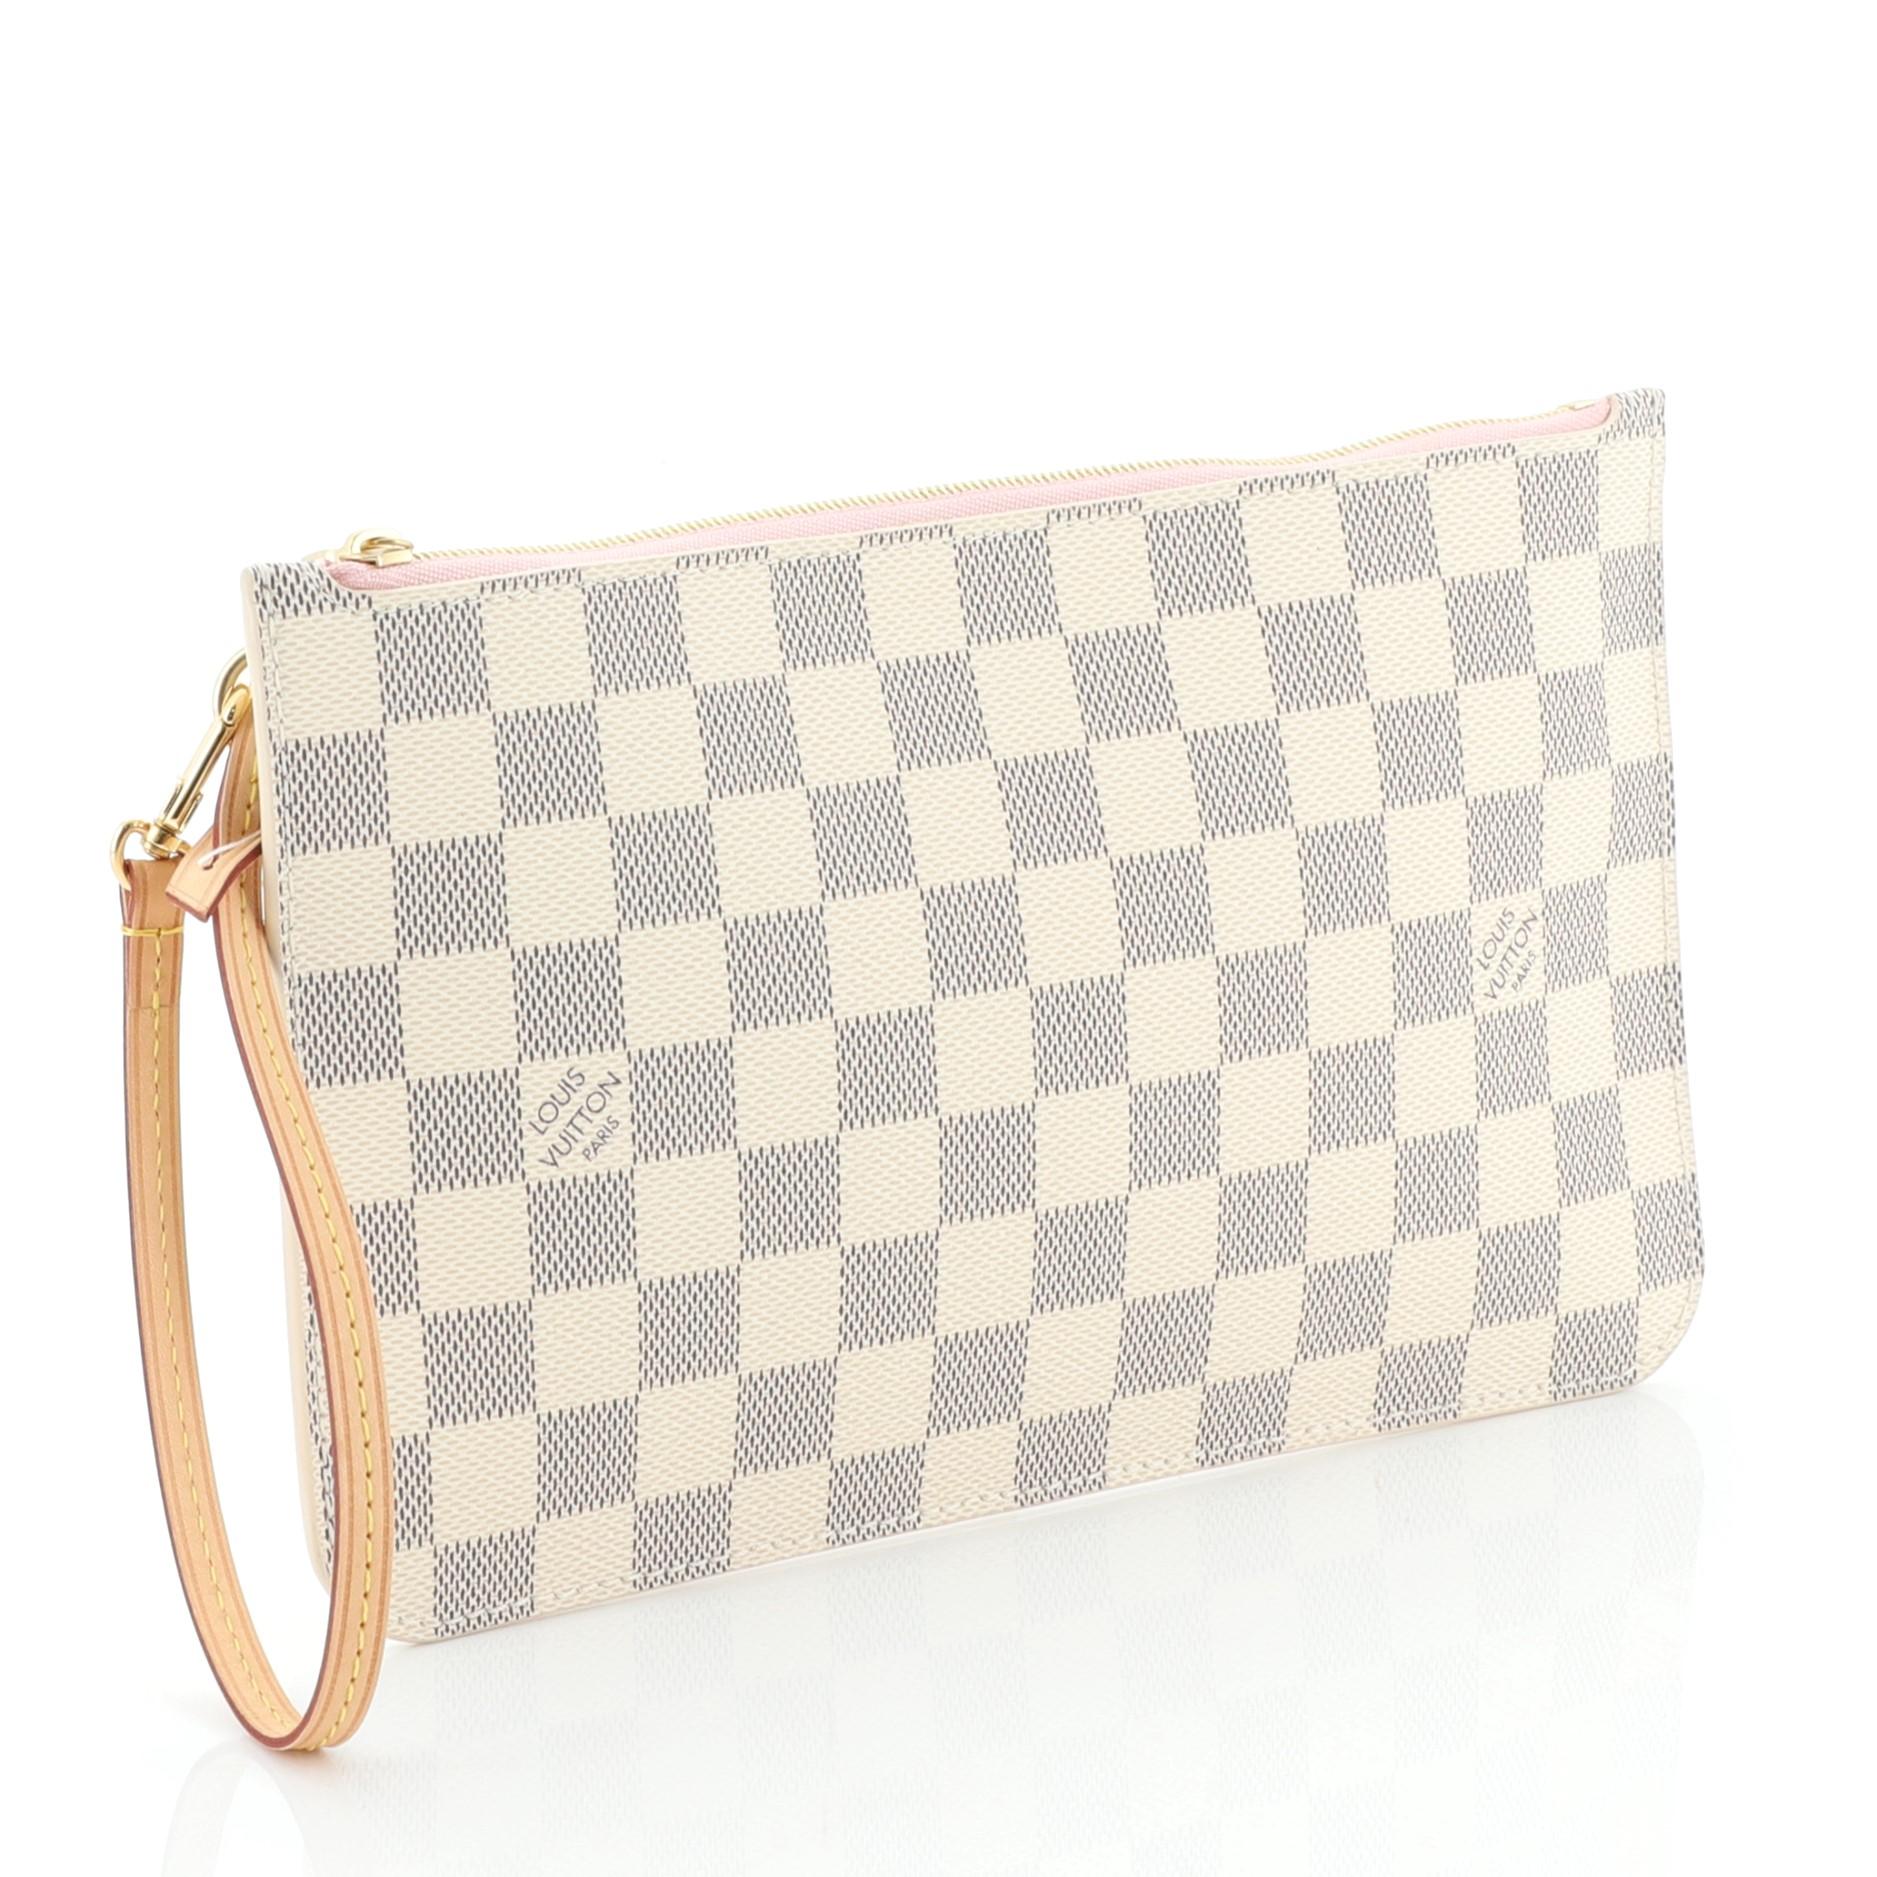 This Louis Vuitton Neverfull Pochette Damier Large, crafted from damier azur coated canvas, features leather wrist strap and gold-tone hardware. Its zip closure opens to a pink fabric interior with slip pocket. Authenticity code reads: MS1178.